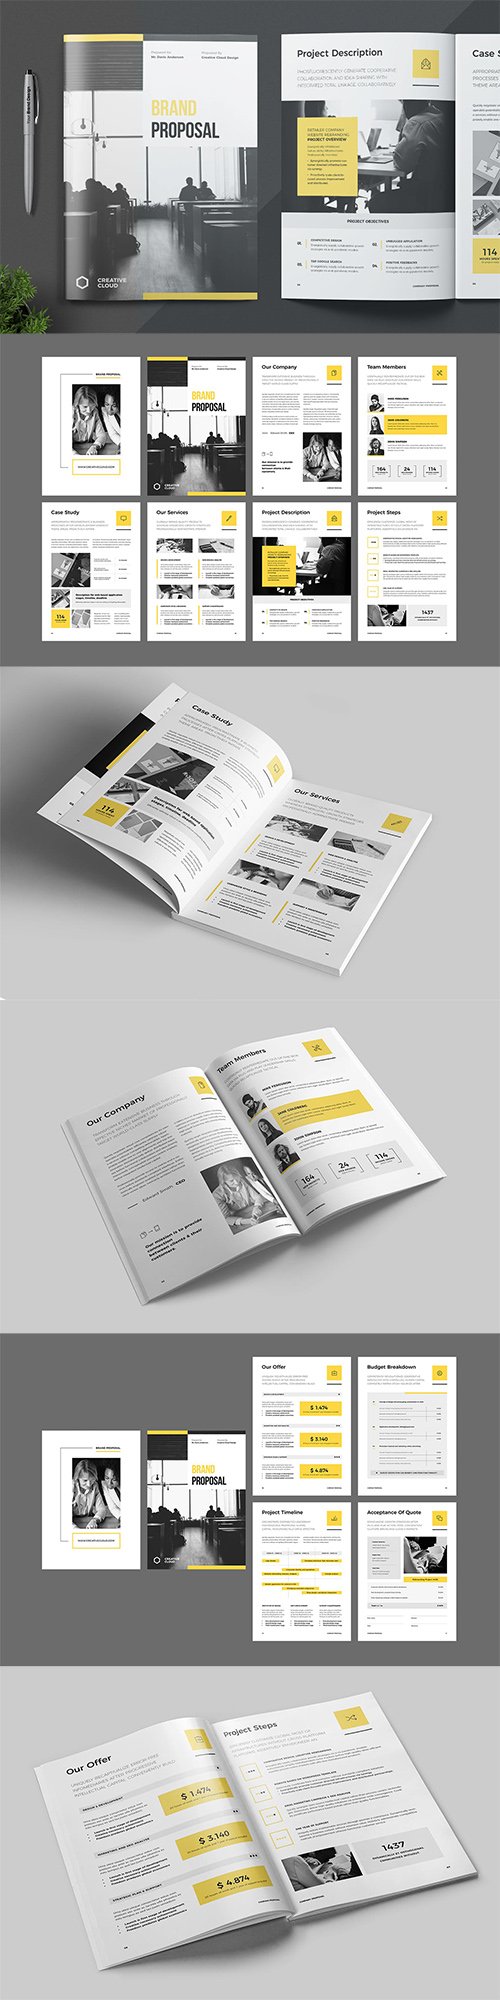 Proposal Indesign Template